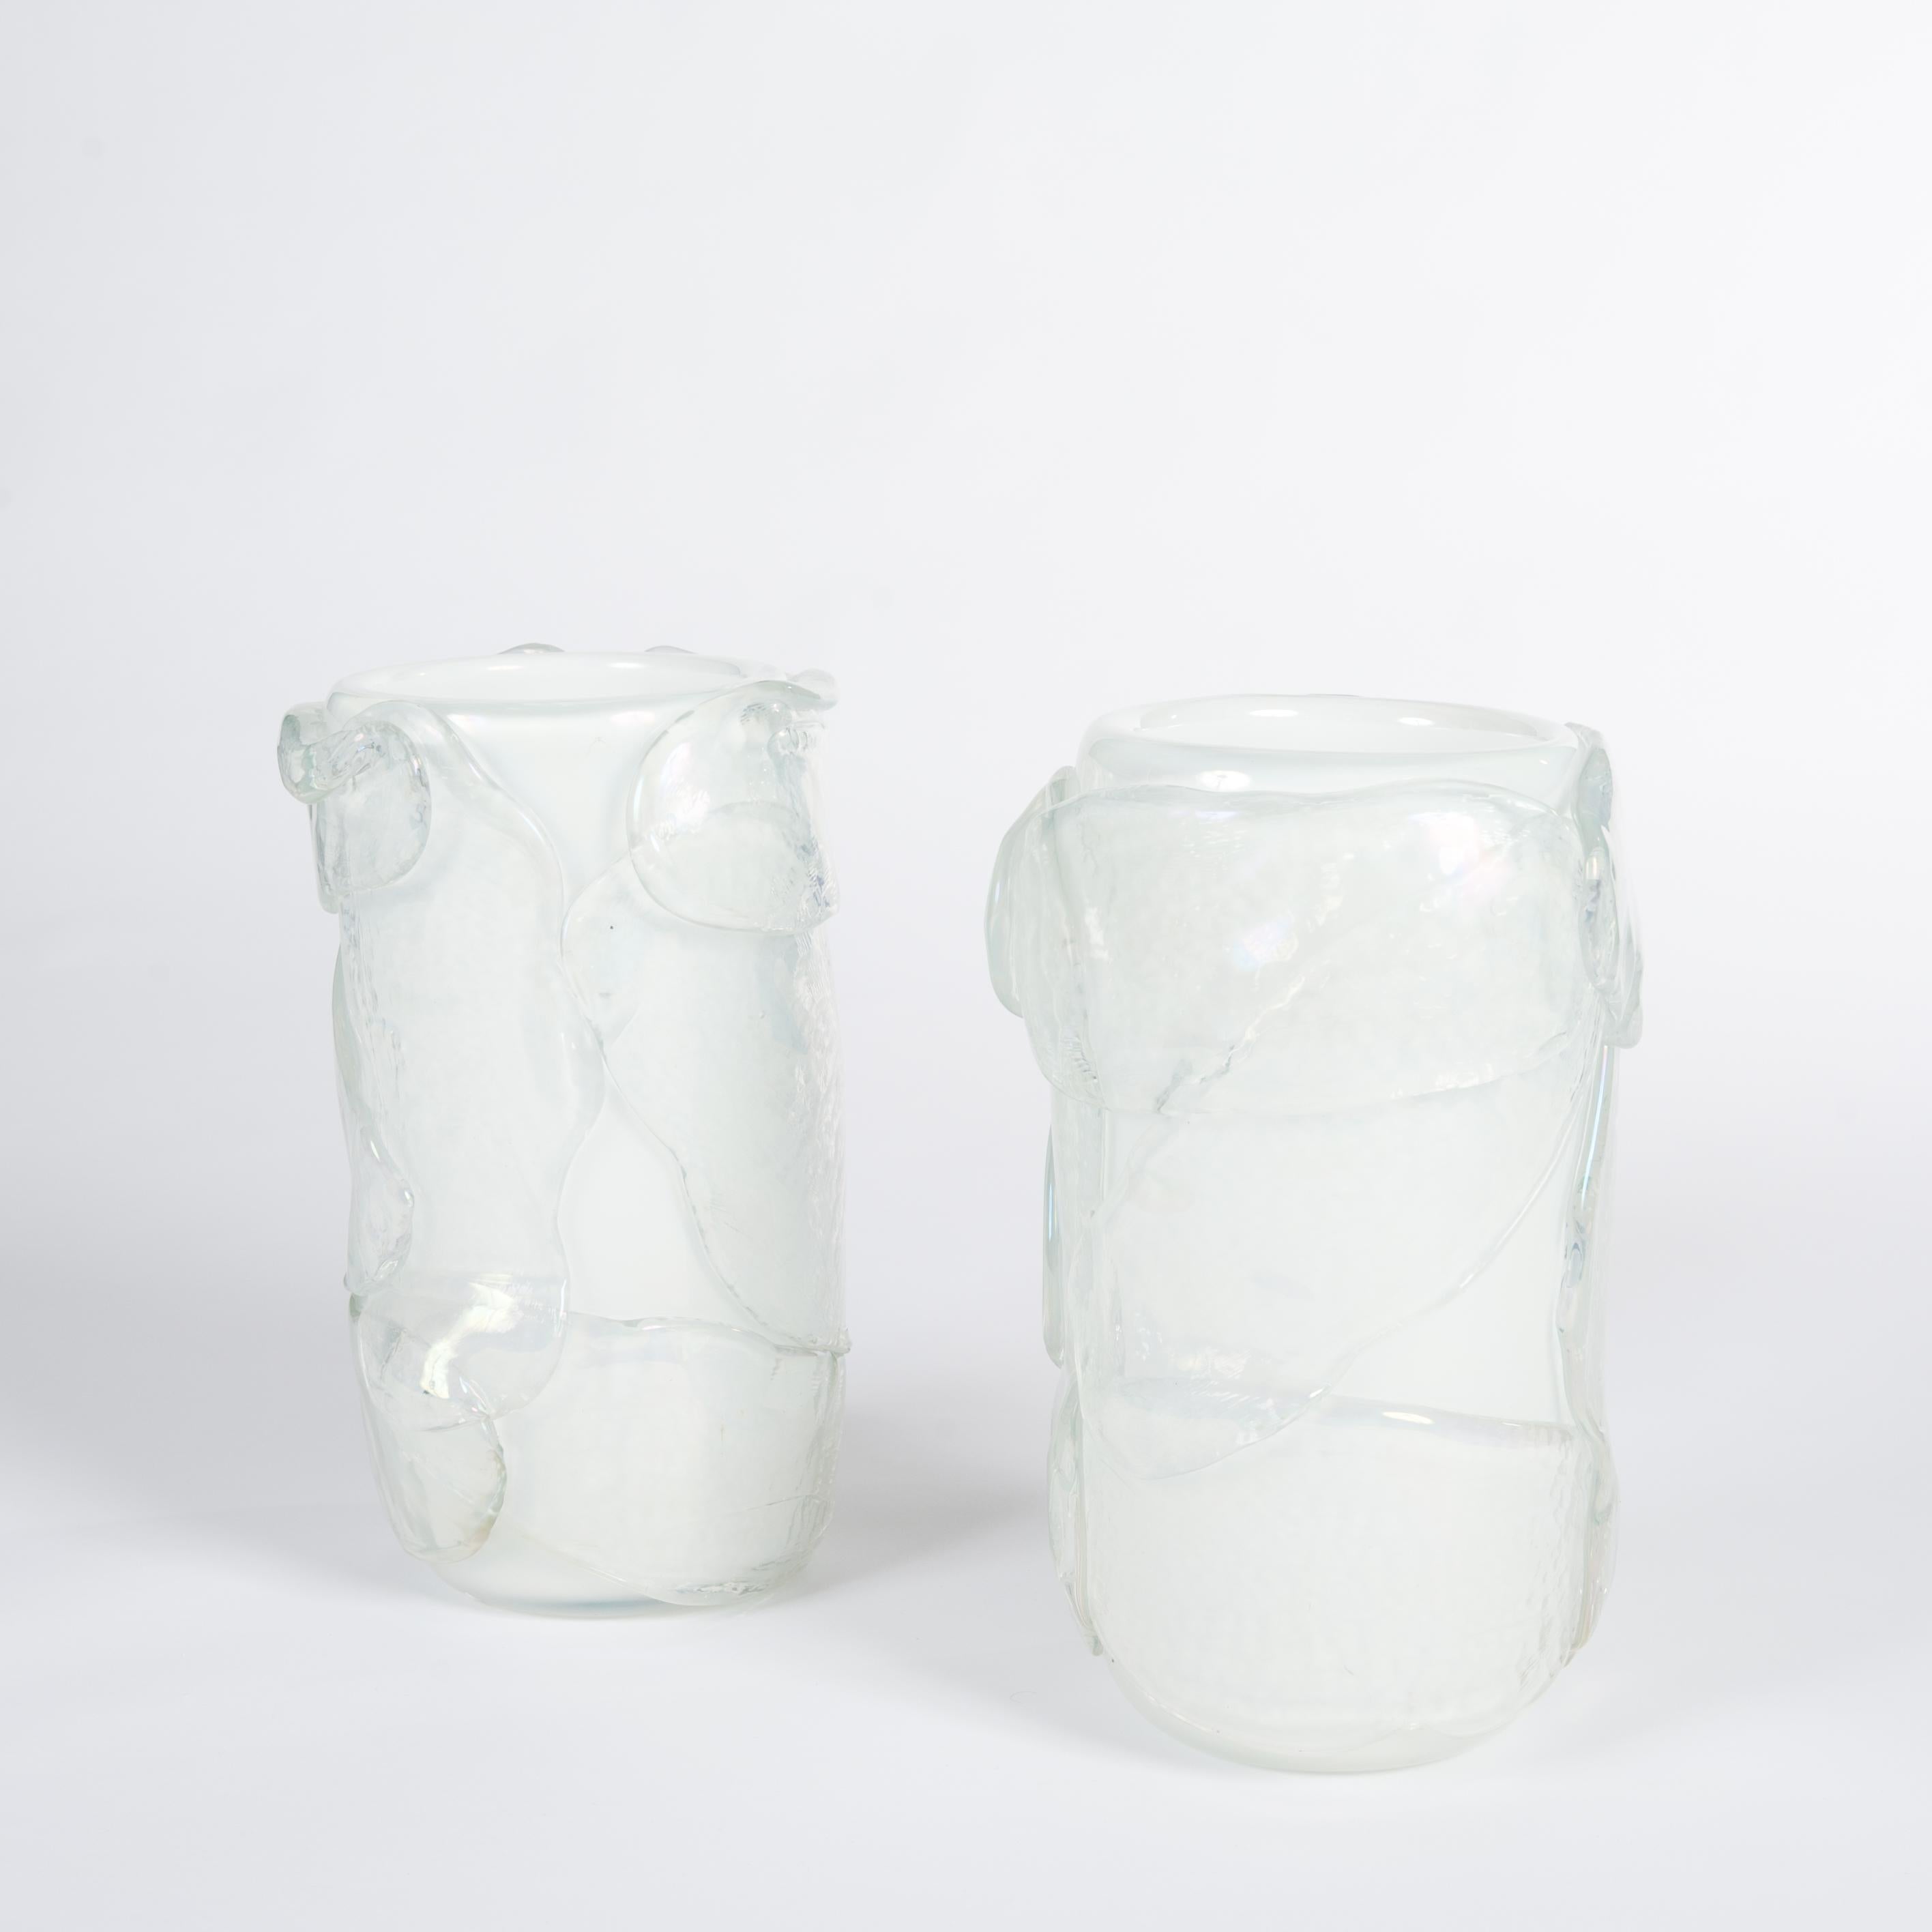 Modern Pair of Huge Murano Glass Vases White-Iridescent Colored with Surreal Impression